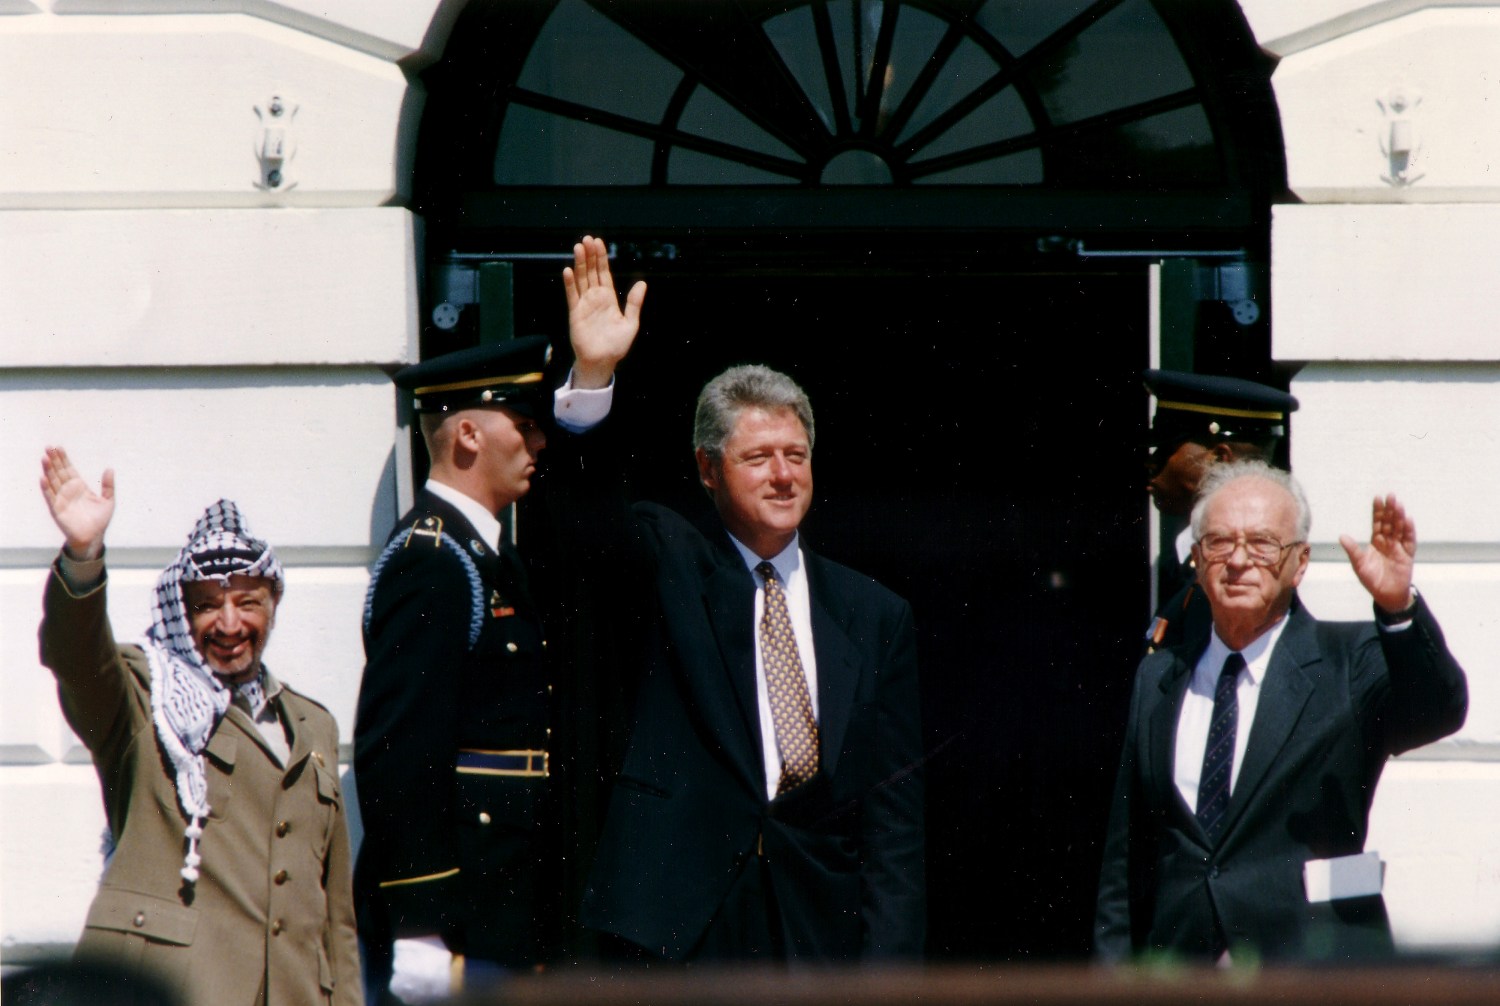 PLO Chairman Yasser Arafat (L) waves with Israeli Prime Minister Yitzhak Rabin (R) and U.S. President Bill Clinton after the signing of the Israeli-PLO peace accord, at the White House in Washington September 13, 1993. REUTERS/Gary Hershorn (UNITED STATES - Tags: POLITICS) - GM1E99E00KE01